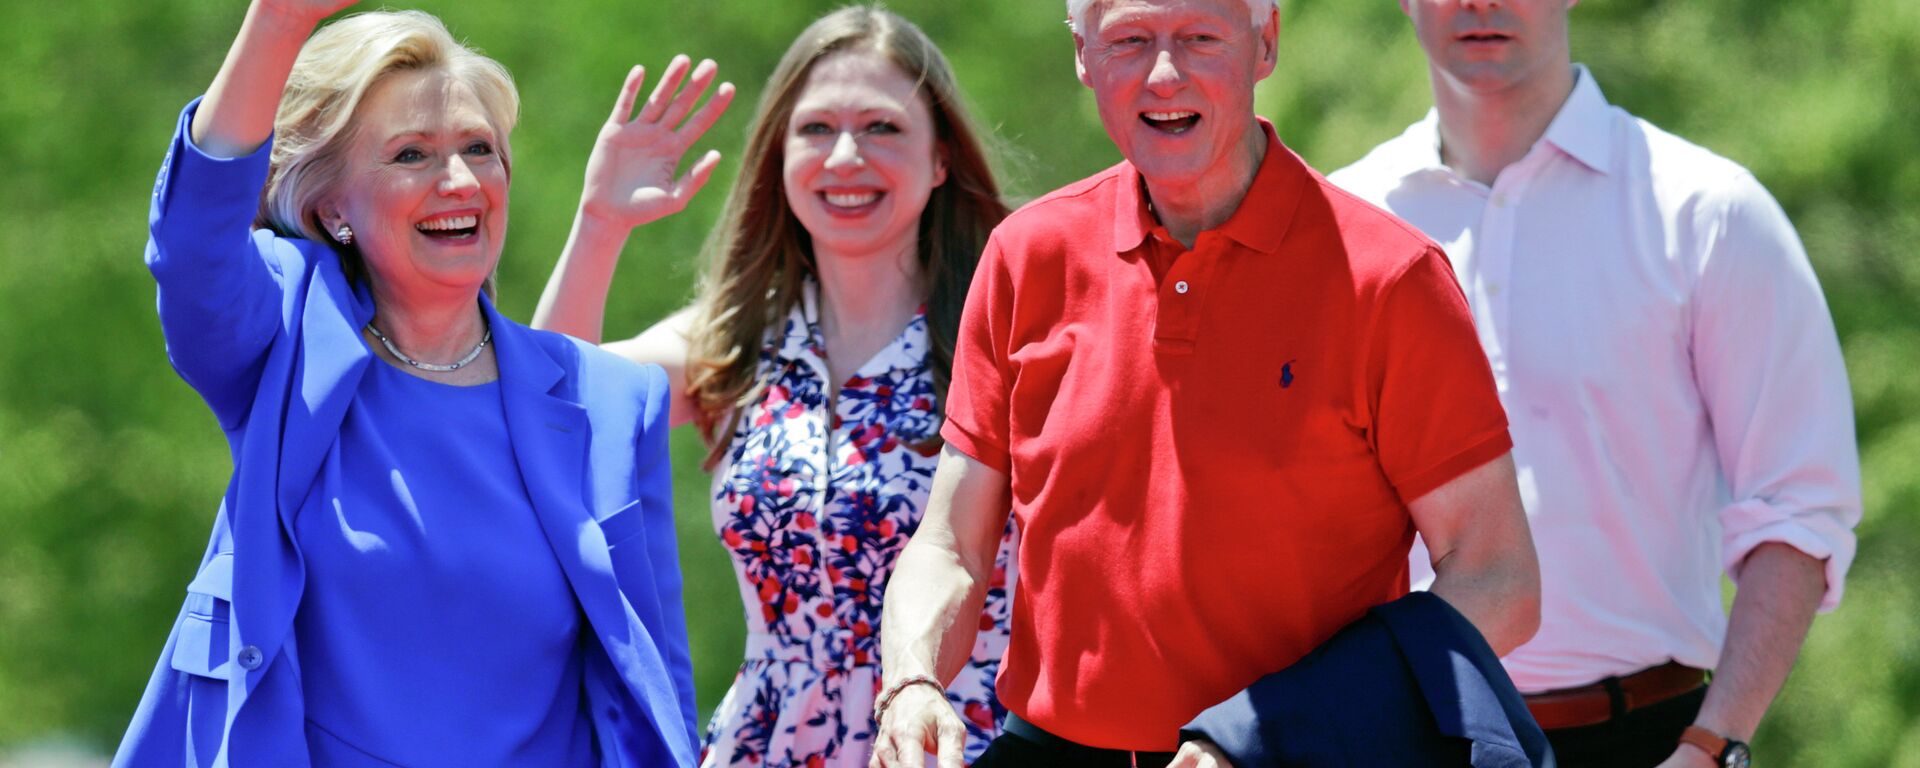 Democratic presidential candidate former Secretary of State Hillary Rodham Clinton waves to supporters as her husband former President Bill Clinton, second from right, Chelsea Clinton, second from left, and her husband Marc Mezvinsky, join on stage Saturday, June 13, 2015, on Roosevelt Island in New York - Sputnik International, 1920, 26.11.2019